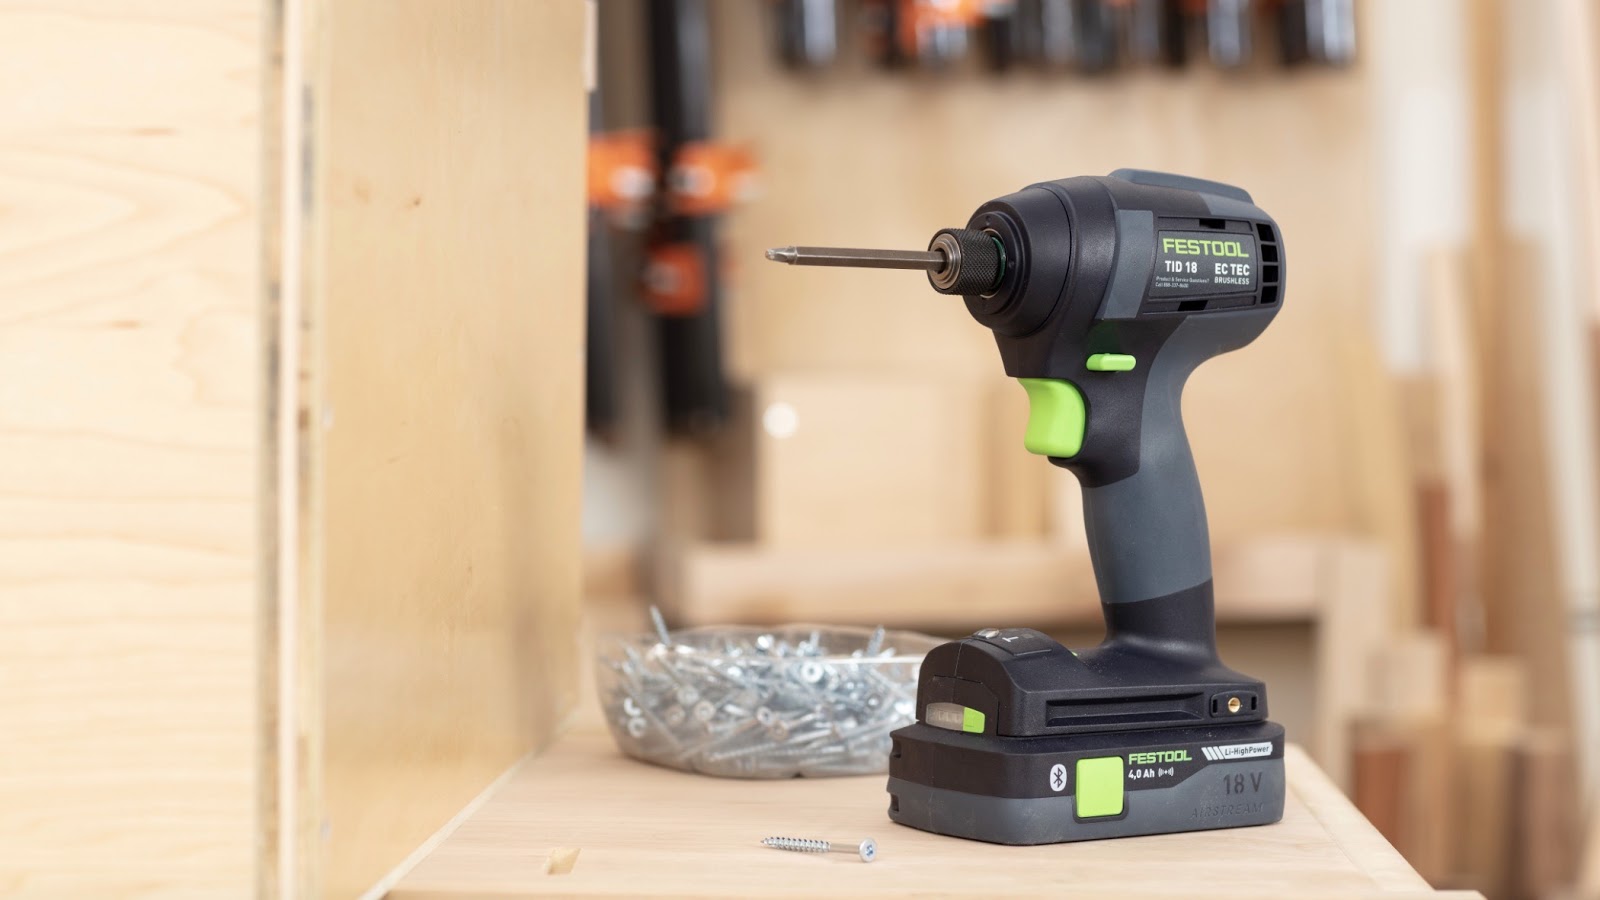 The Festool TID 18 is a Smarter Kind of Cordless Impact Driver